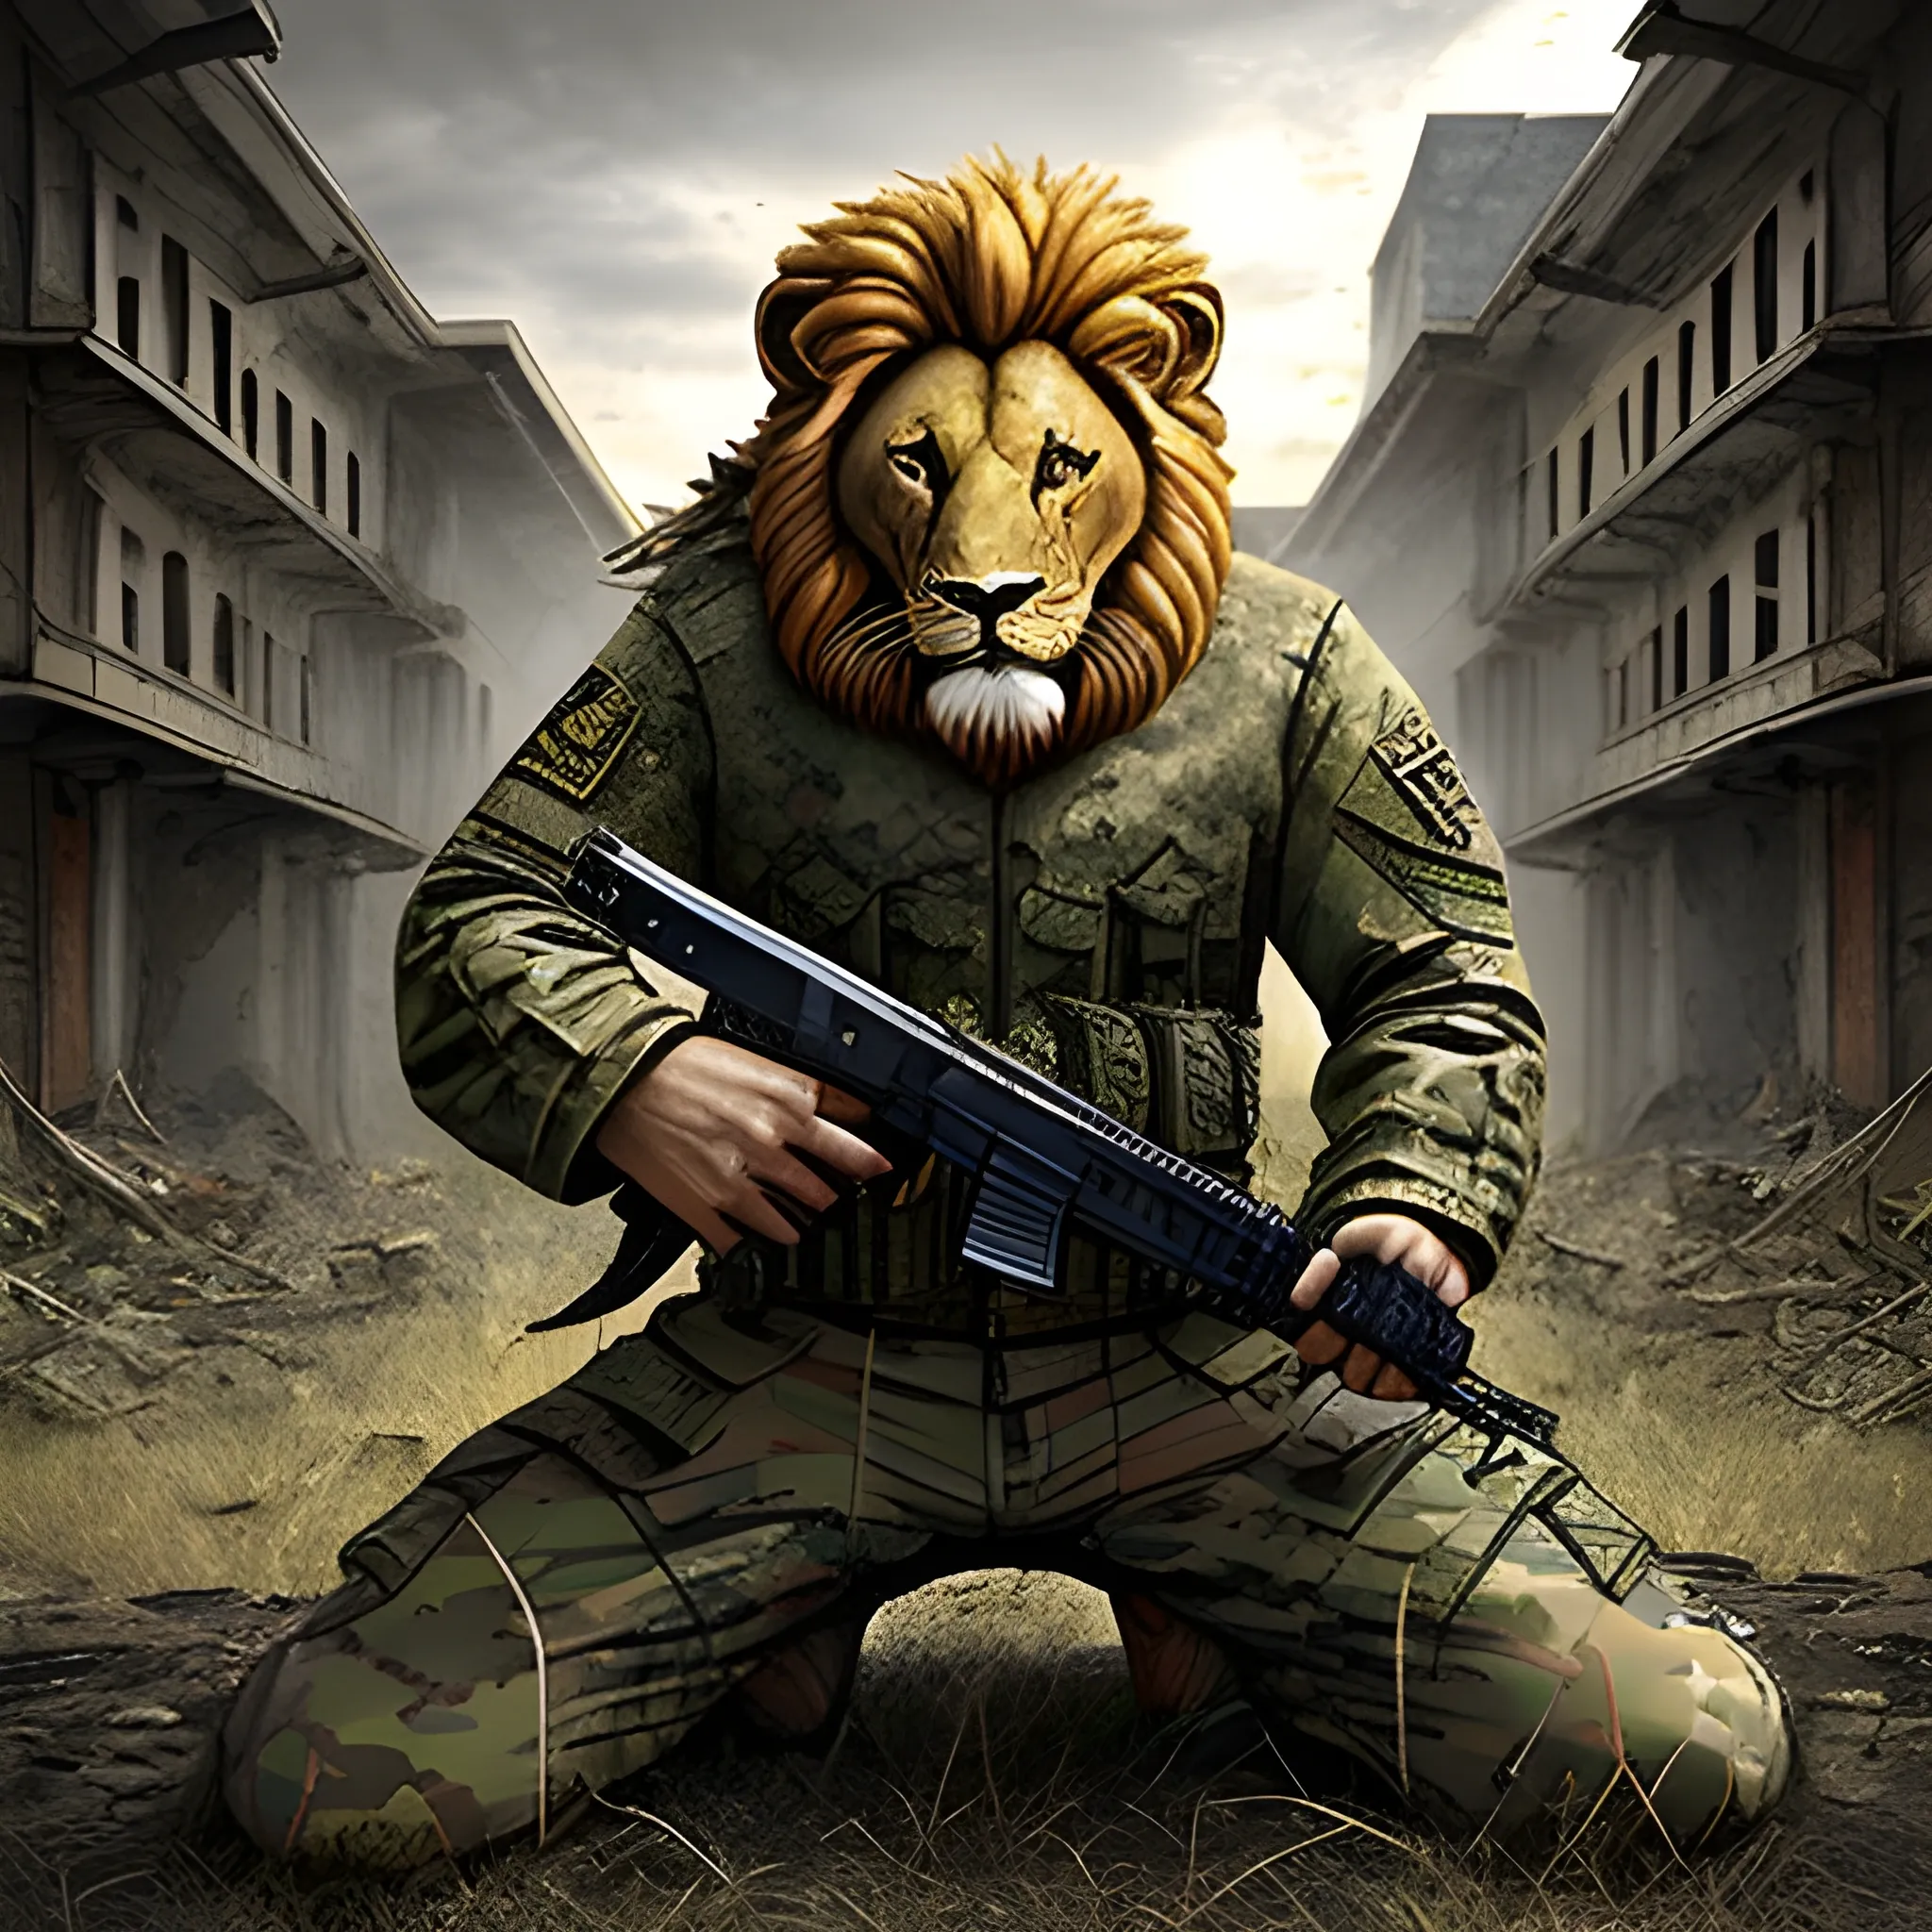 Strong lion, wordwar, army, dangerous, abandoned place, army custom 